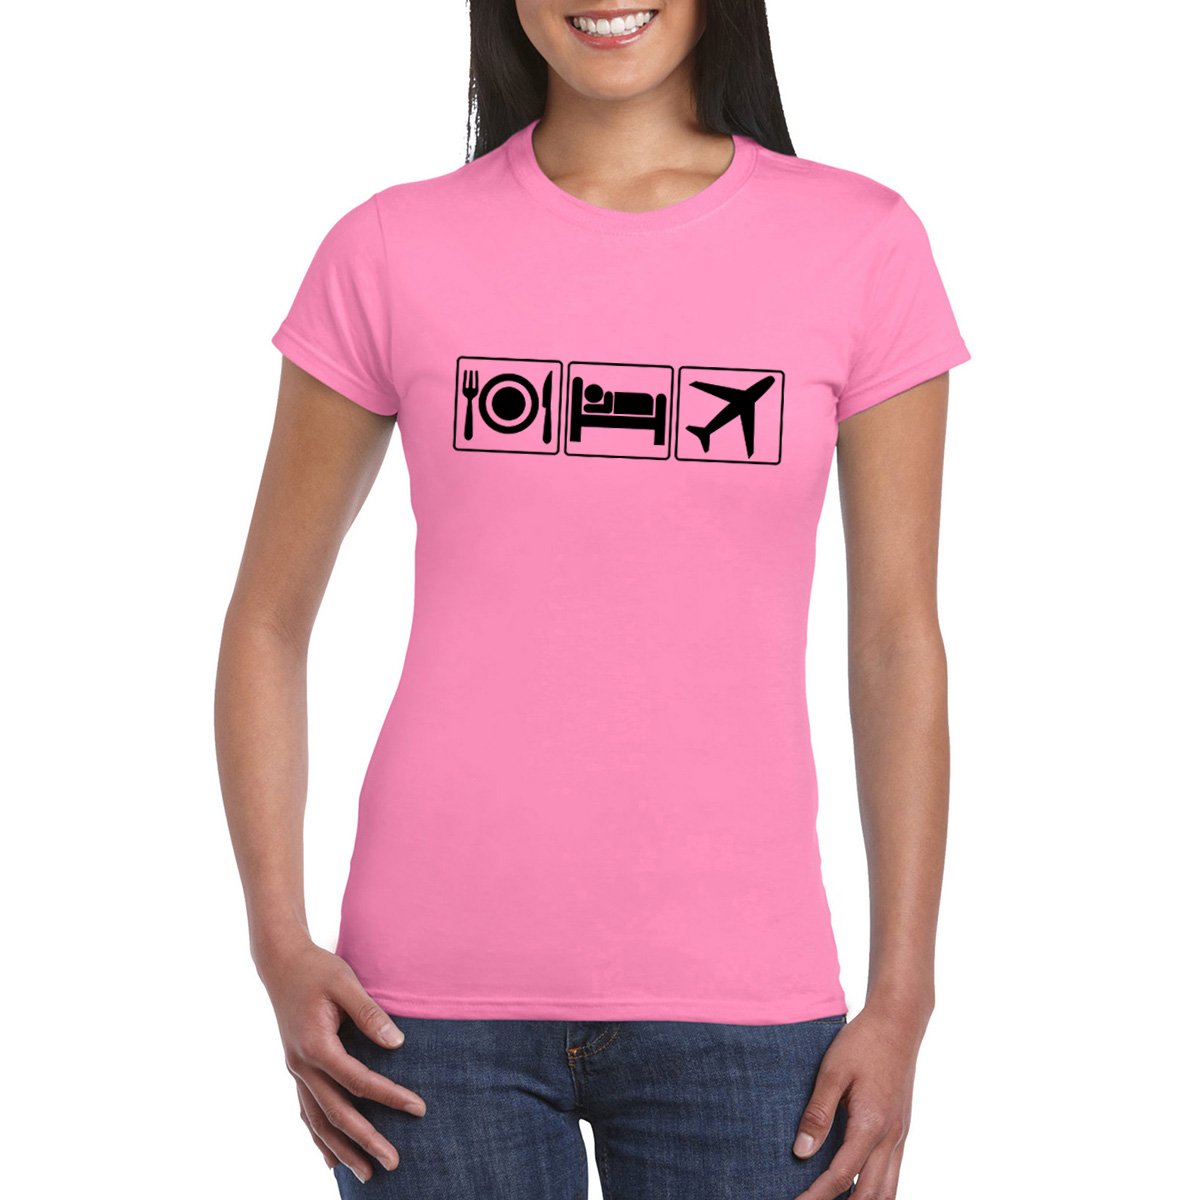 EAT SLEEP FLY Semi-Fitted Women's T-Shirt